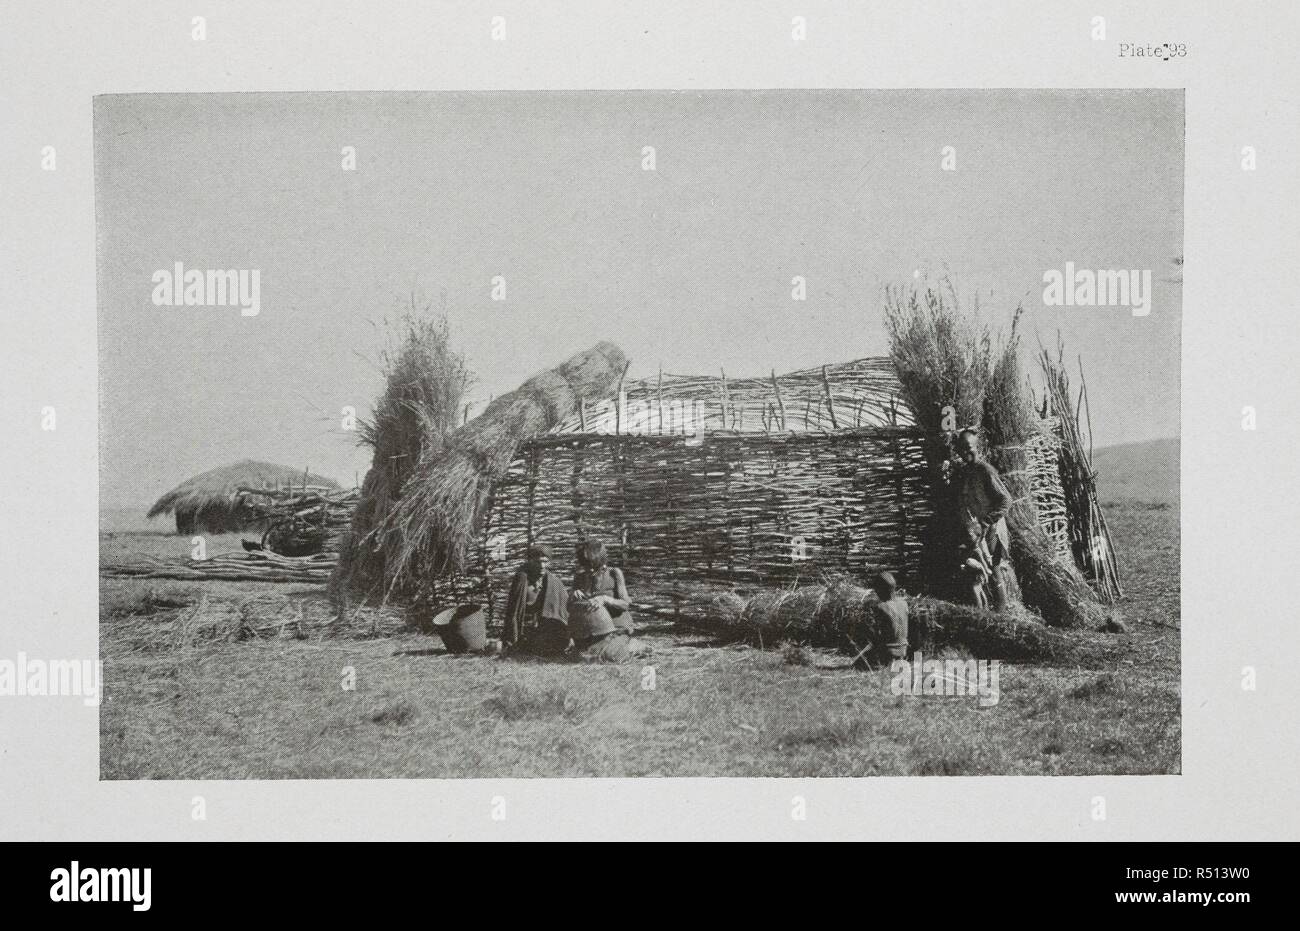 A Pondo hut. The Essential Kafir ... With one hundred full-page illustrations by the author. London : Adam & Charles Black, 1904. Source: 10096.h.20 plate 93. Author: Kidd, Dudley. Stock Photo